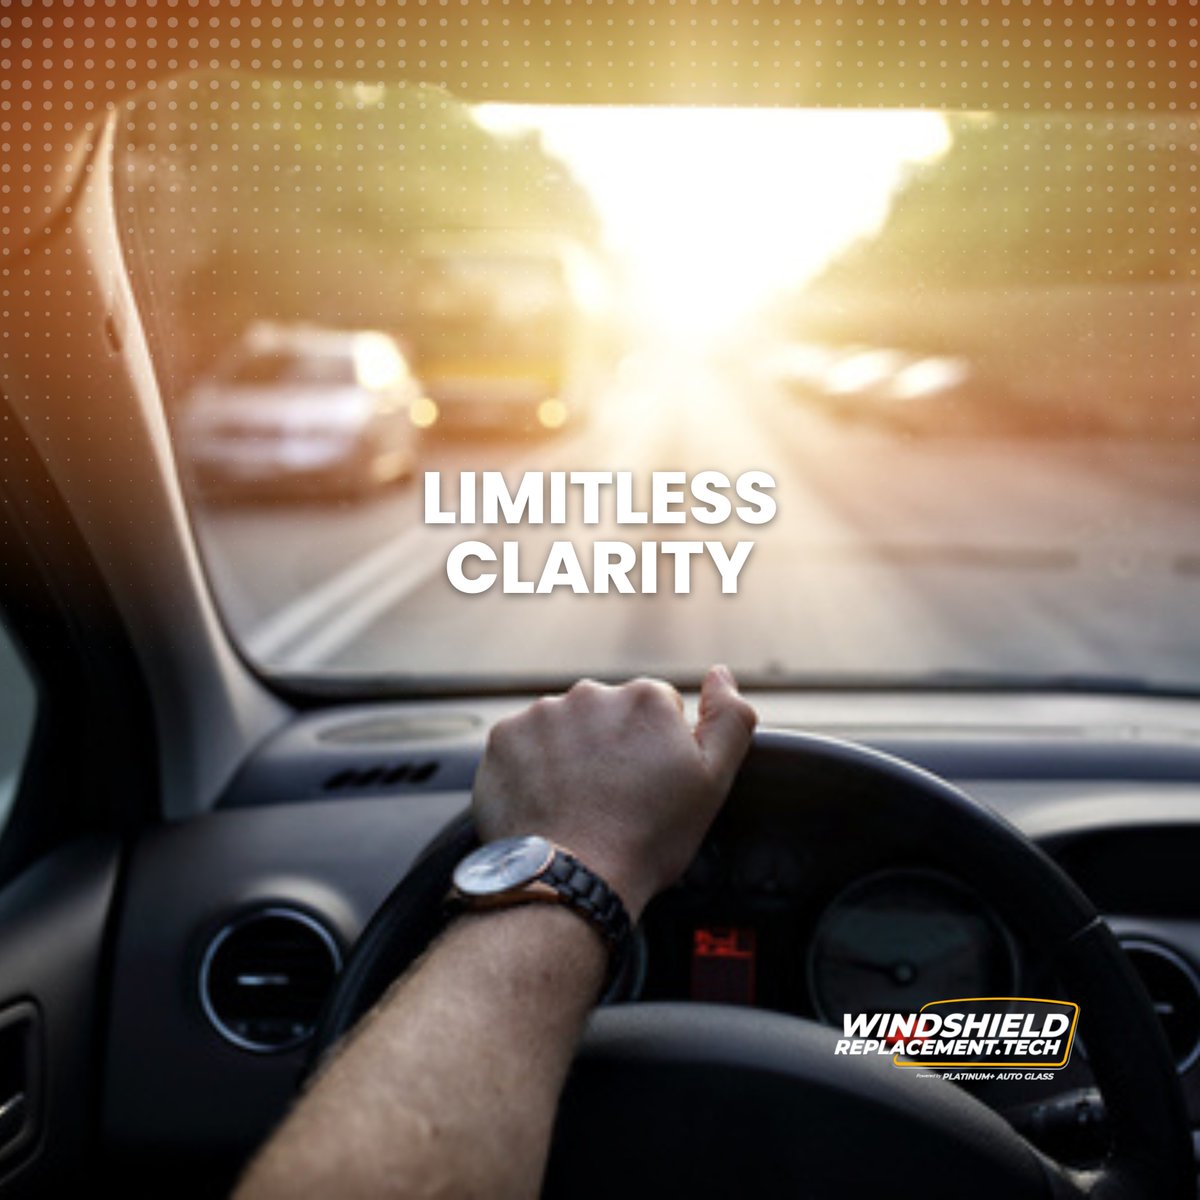 Don't let a cracked window limit your view of the road and your potential. Our superior windshield replacement services offer the clarity you need to achieve your goals and drive safely without any limitations. Schedule an appointment with us today! 🚘💯

#ClearViewAhead